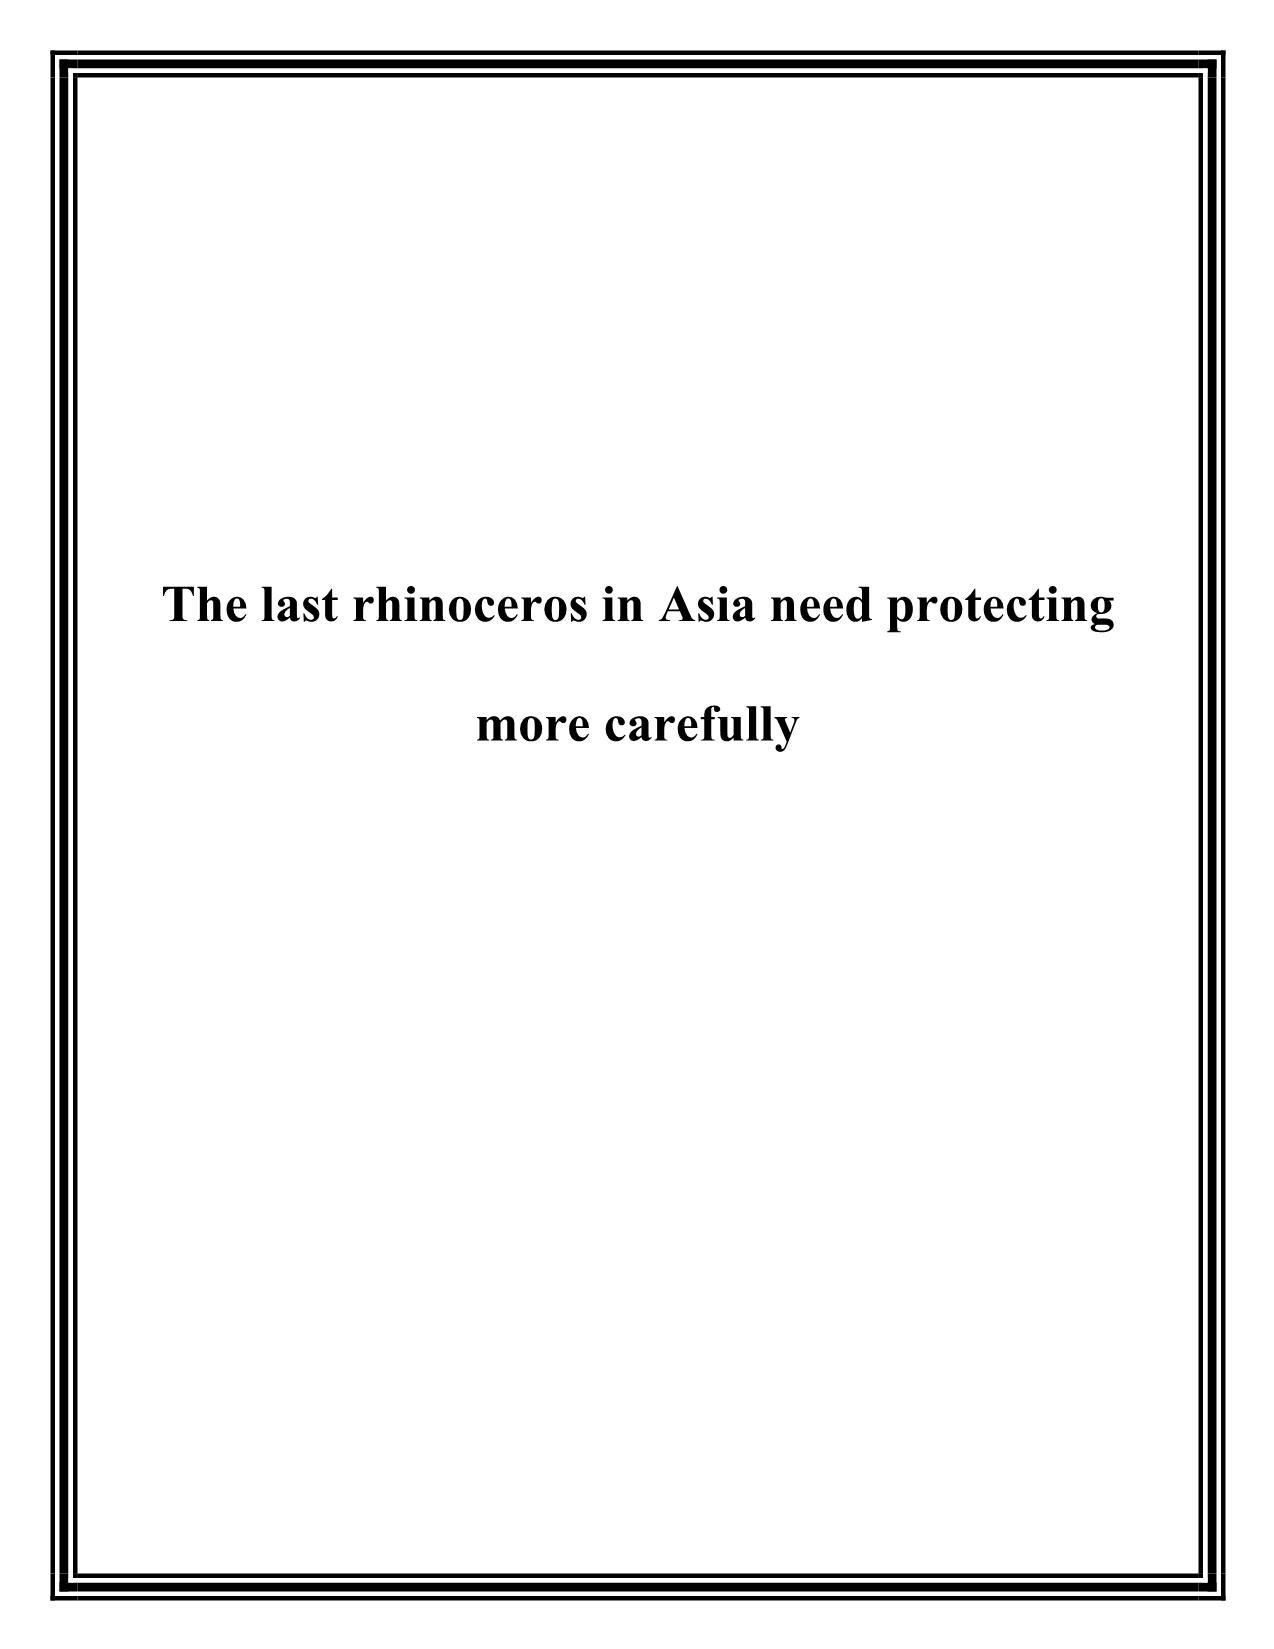 The last rhinoceros in Asia need protecting more carefully trang 1